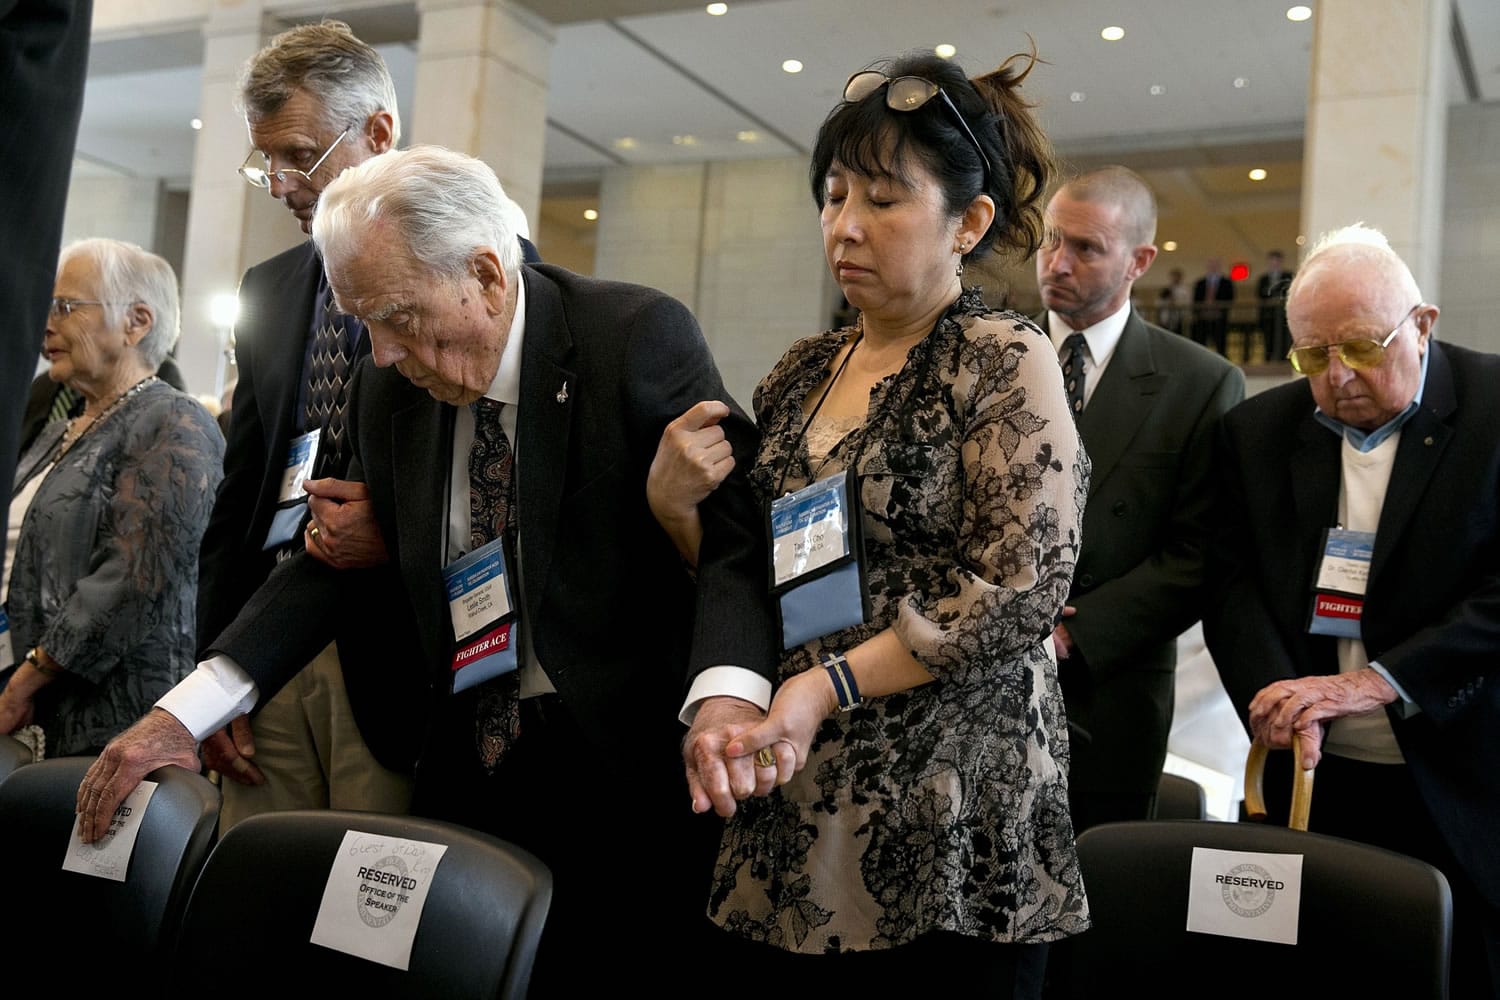 Rand Smith, left, of Mooresville, N.C., helps his father Fighter Ace Air Force Brigadier Gen. Leslie Smith, 96, of Walnut Creek, Calif., to stand with help from Smith's caregiver Taehee Cho, during a prayer at a ceremony awarding the Congressional Gold Medal to the American Fighter Aces, on Wednesday on Capitol Hill in Washington.